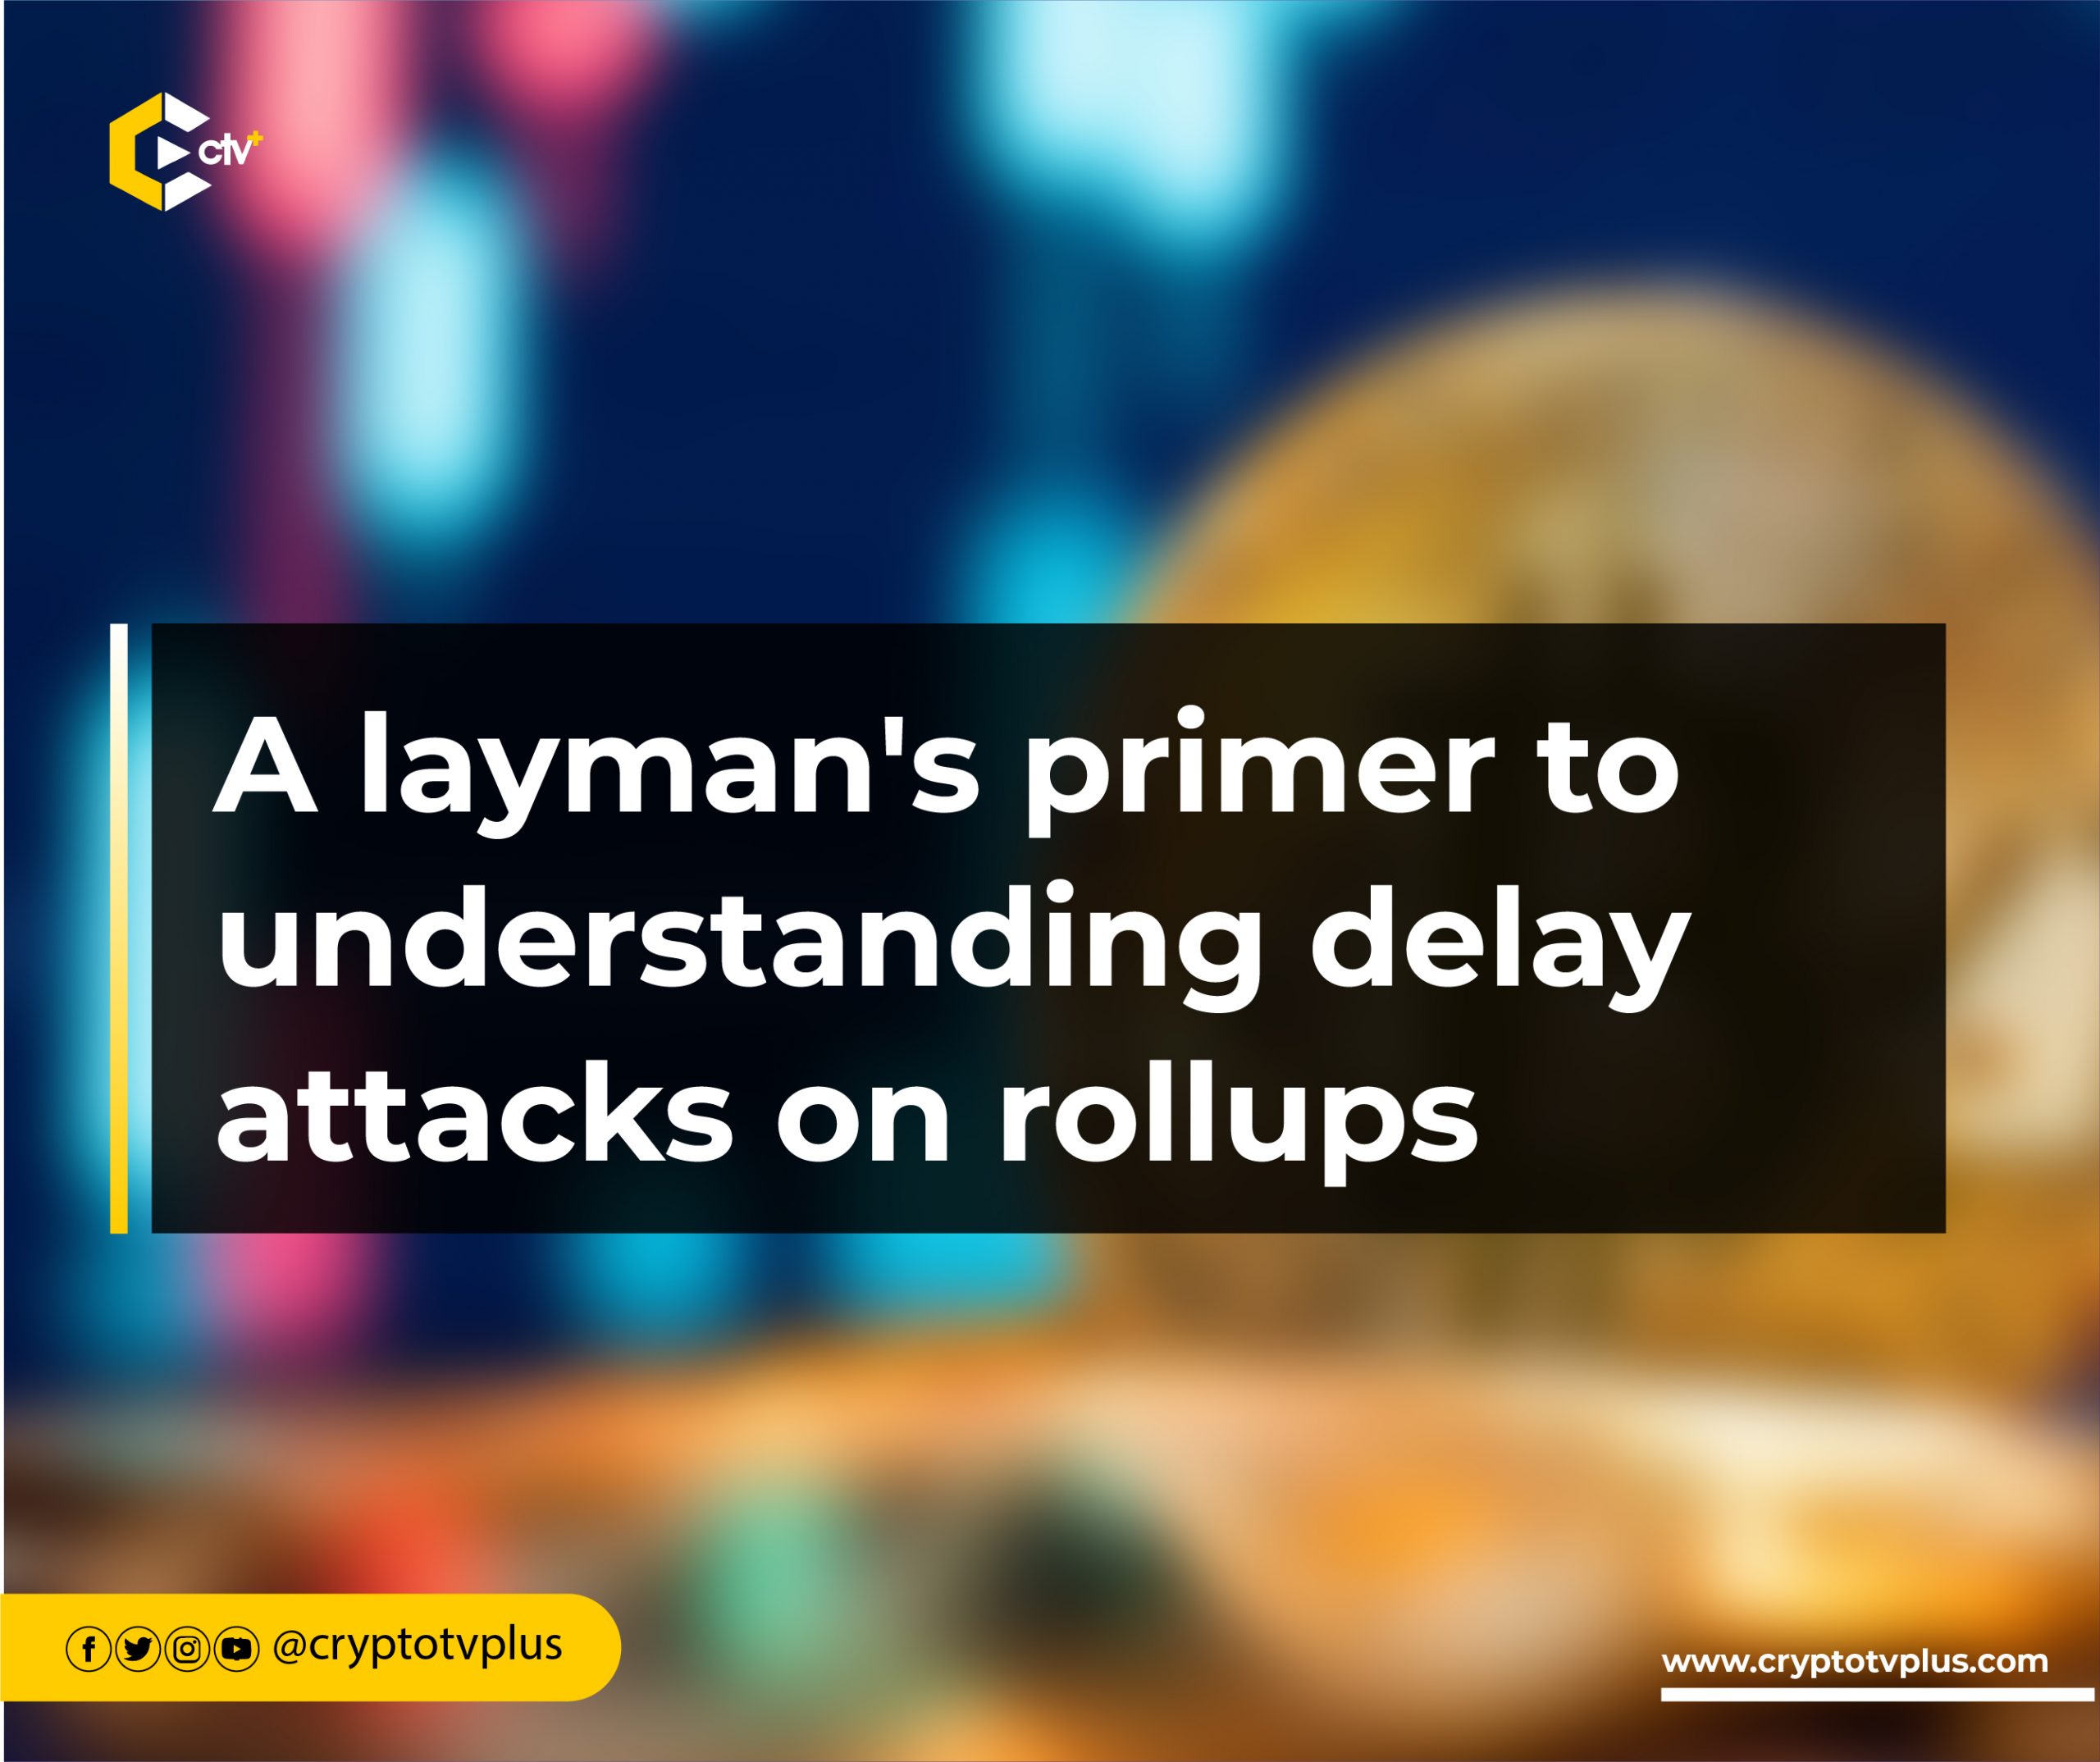 A layman's primer to understanding delay attacks on rollups